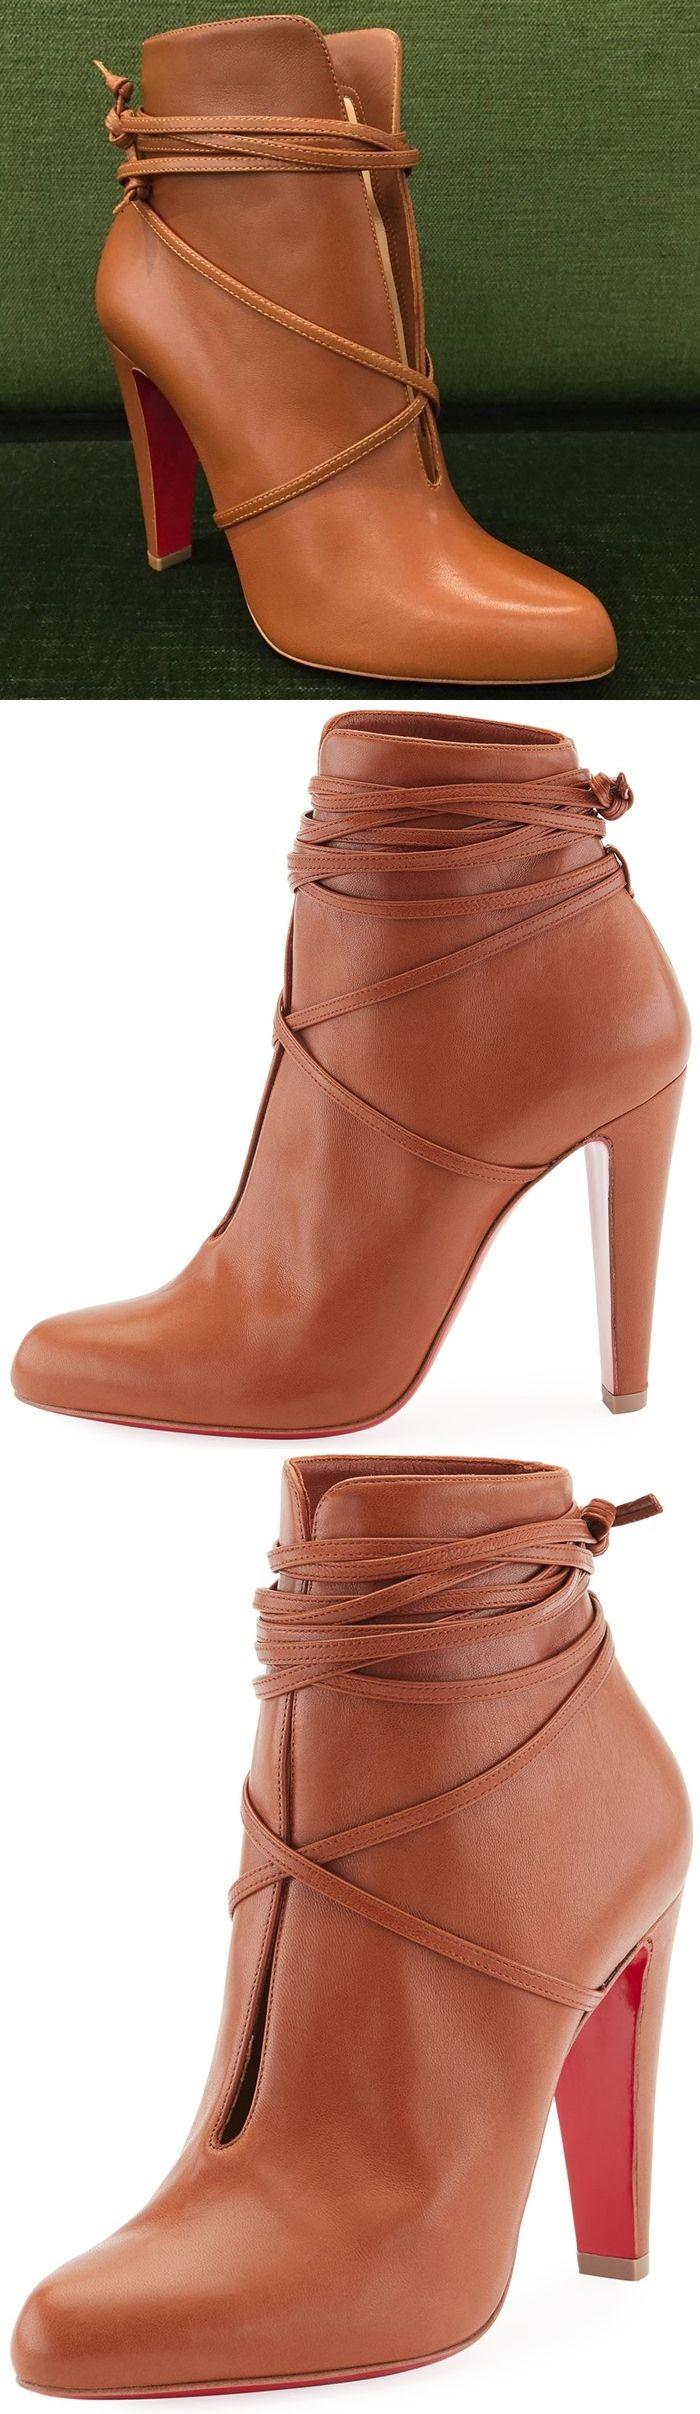 Wedding - Christian Louboutin's Must-Have 'S.I.T. Rain' Leather Ankle Boots